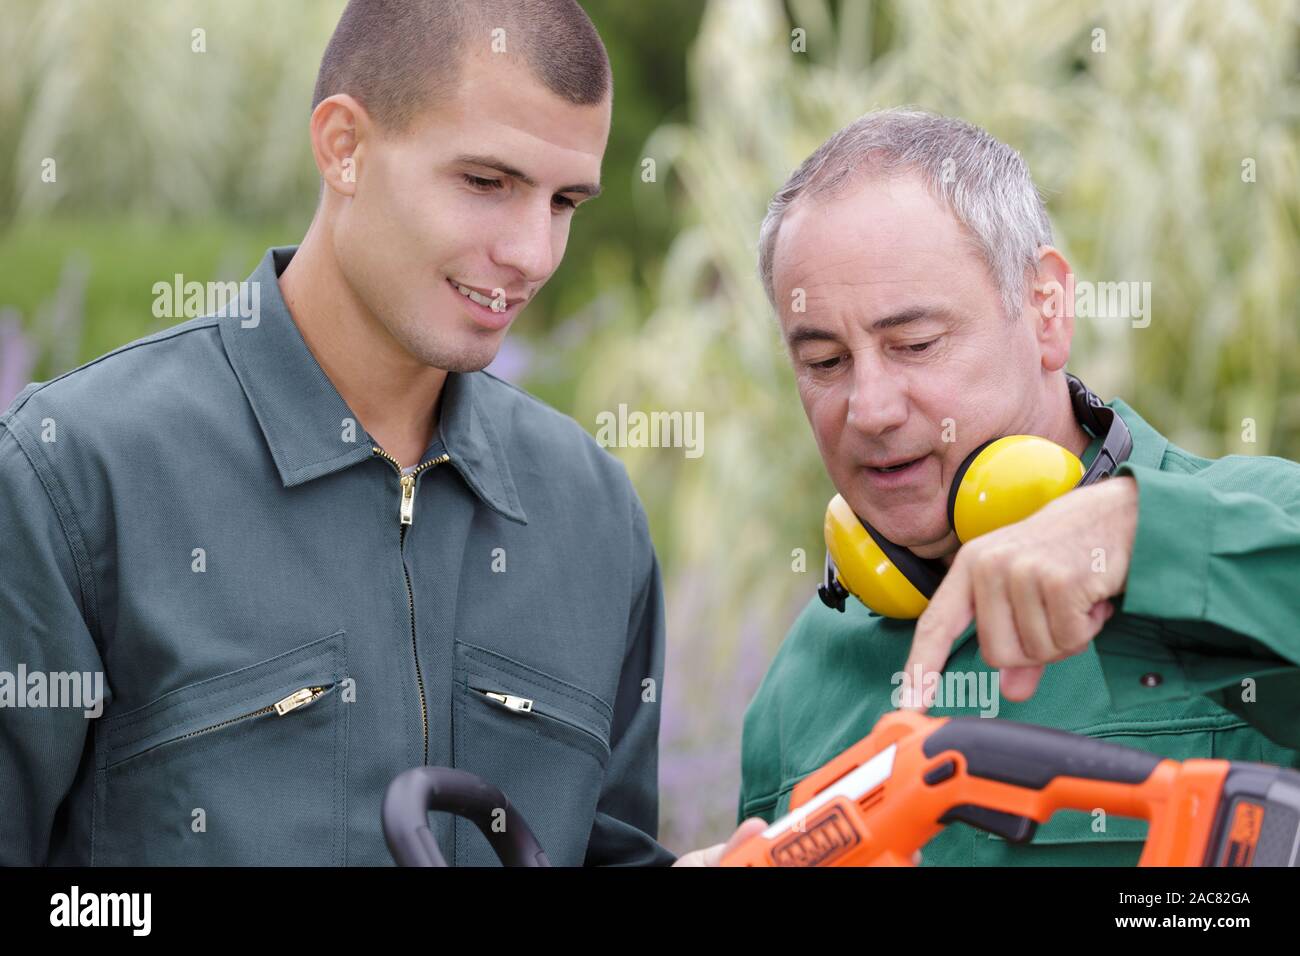 young male gardener learning how to use machine Stock Photo